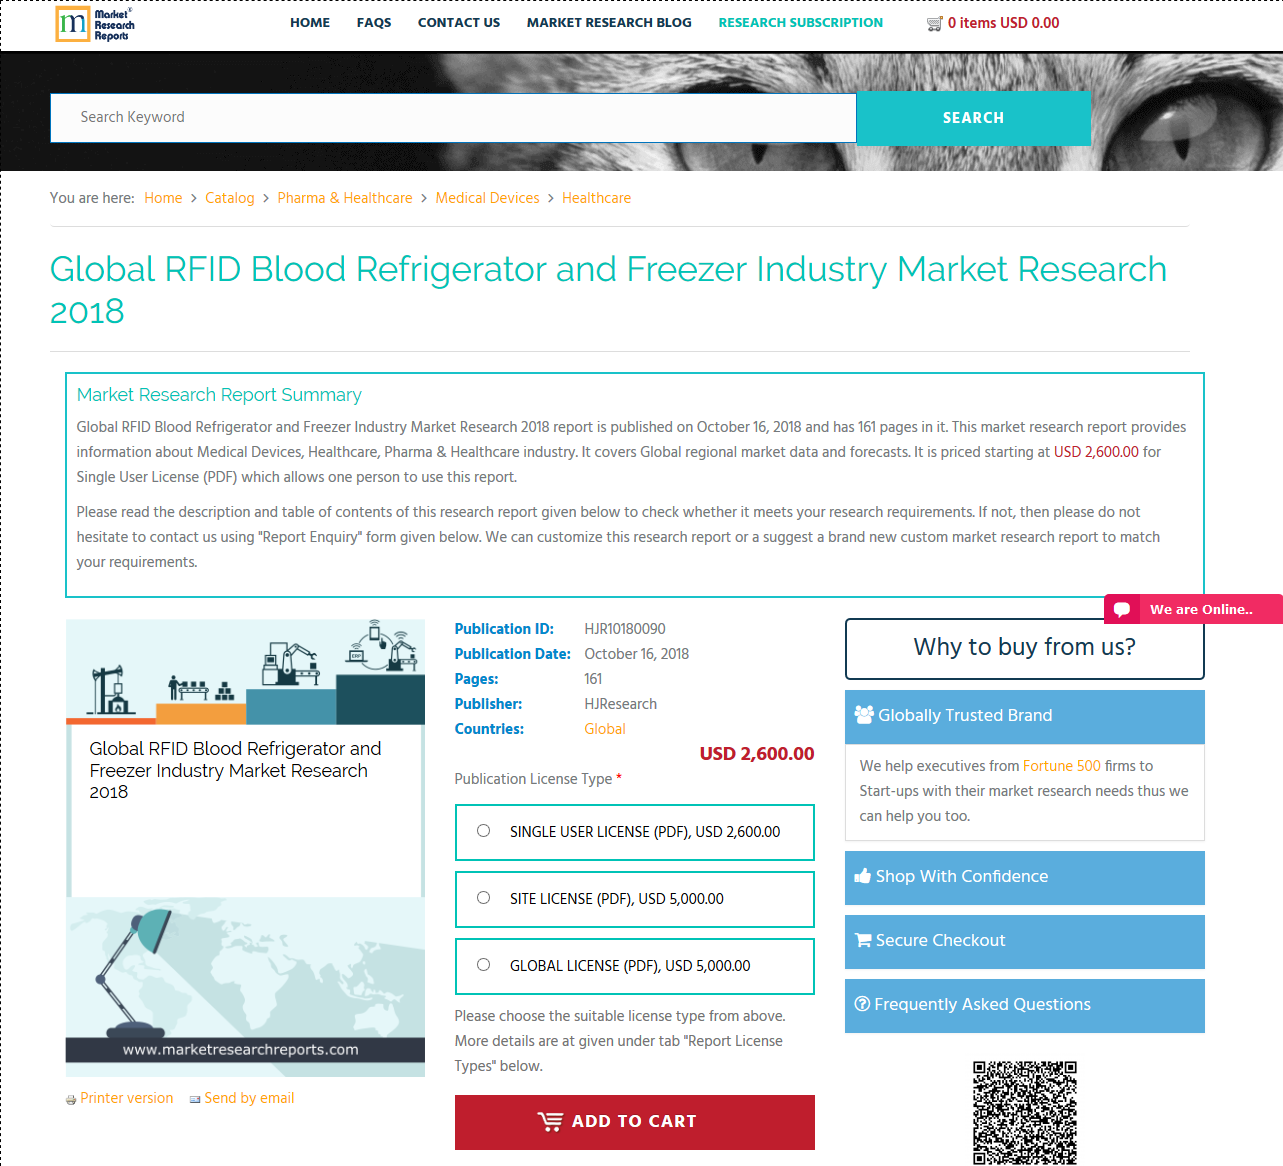 Global RFID Blood Refrigerator and Freezer Industry'